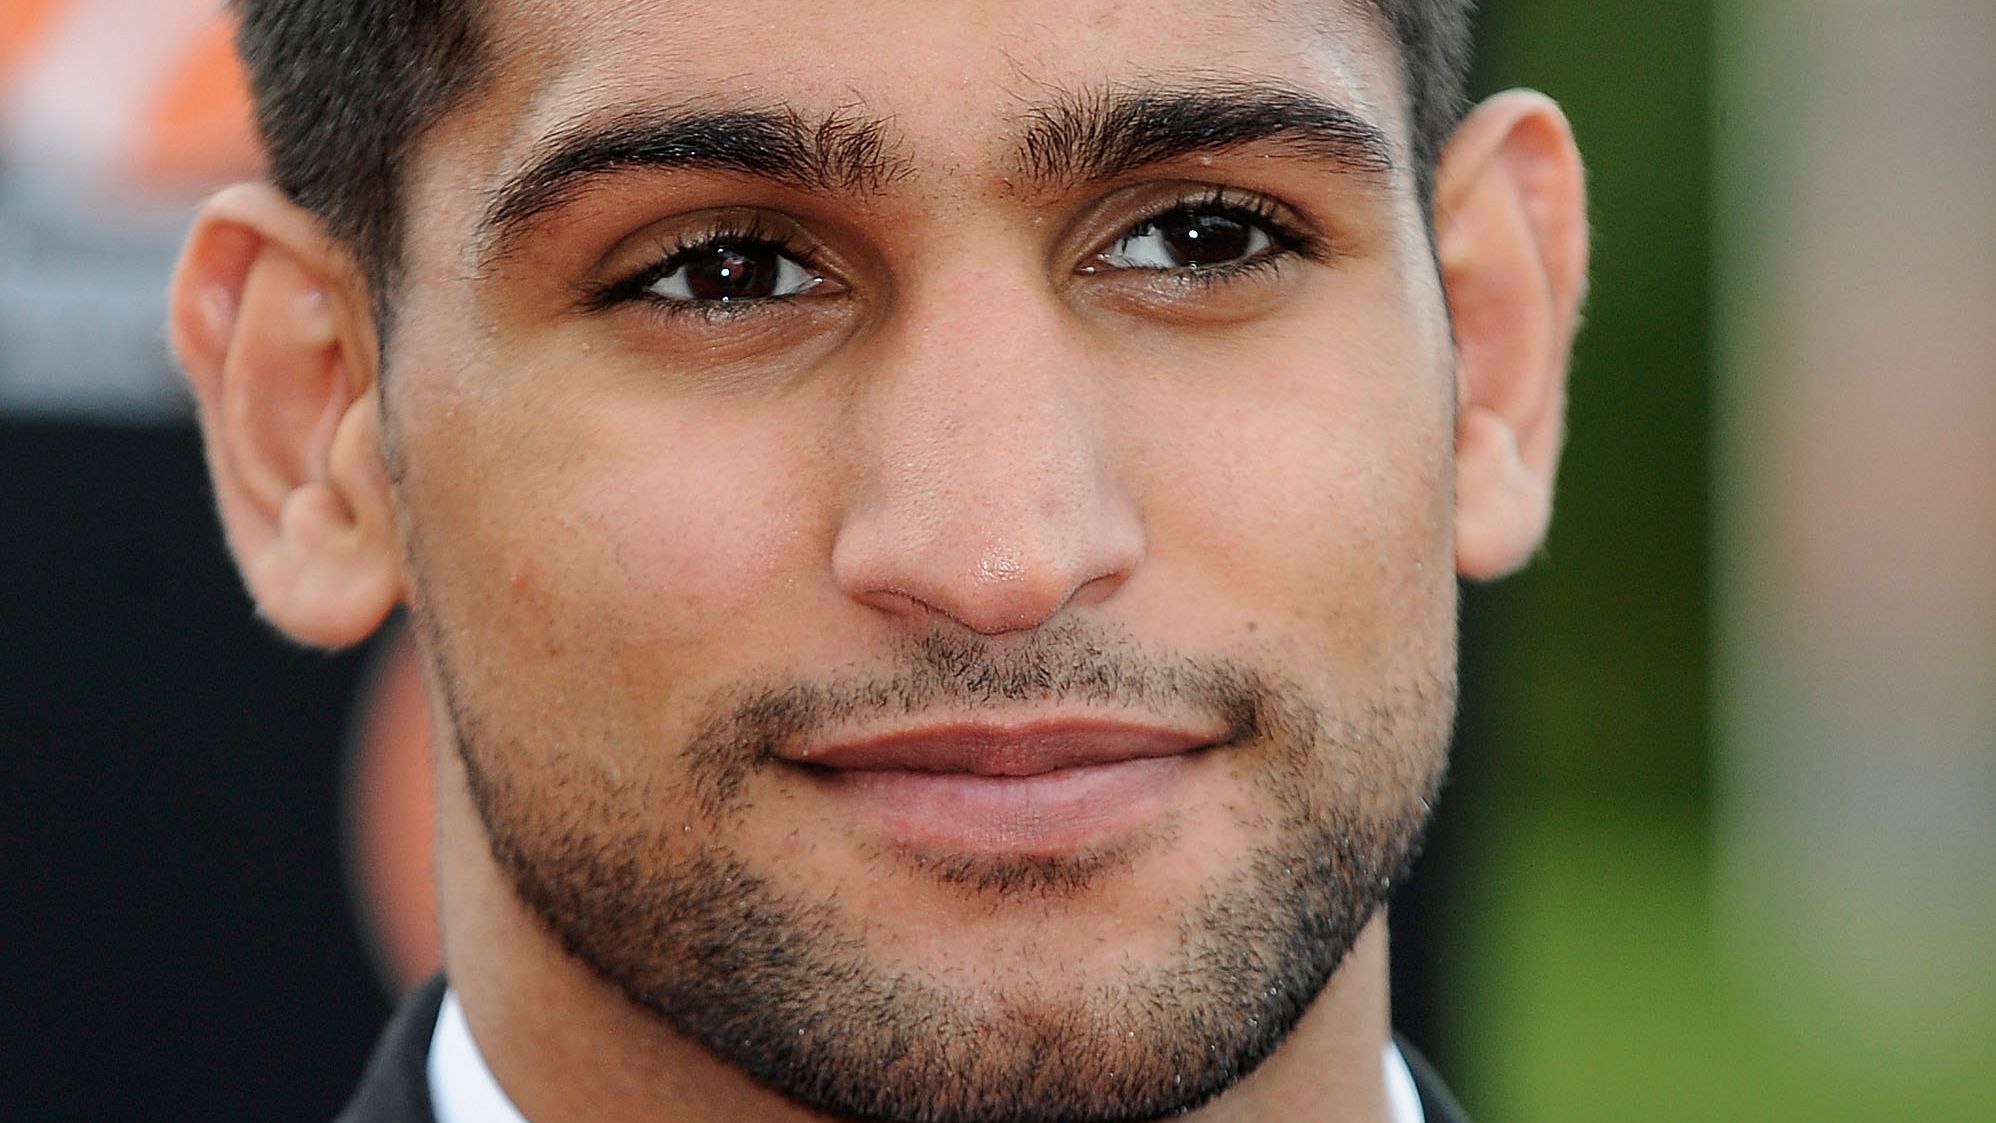 Two men cleared over robbery of Amir Khan in London